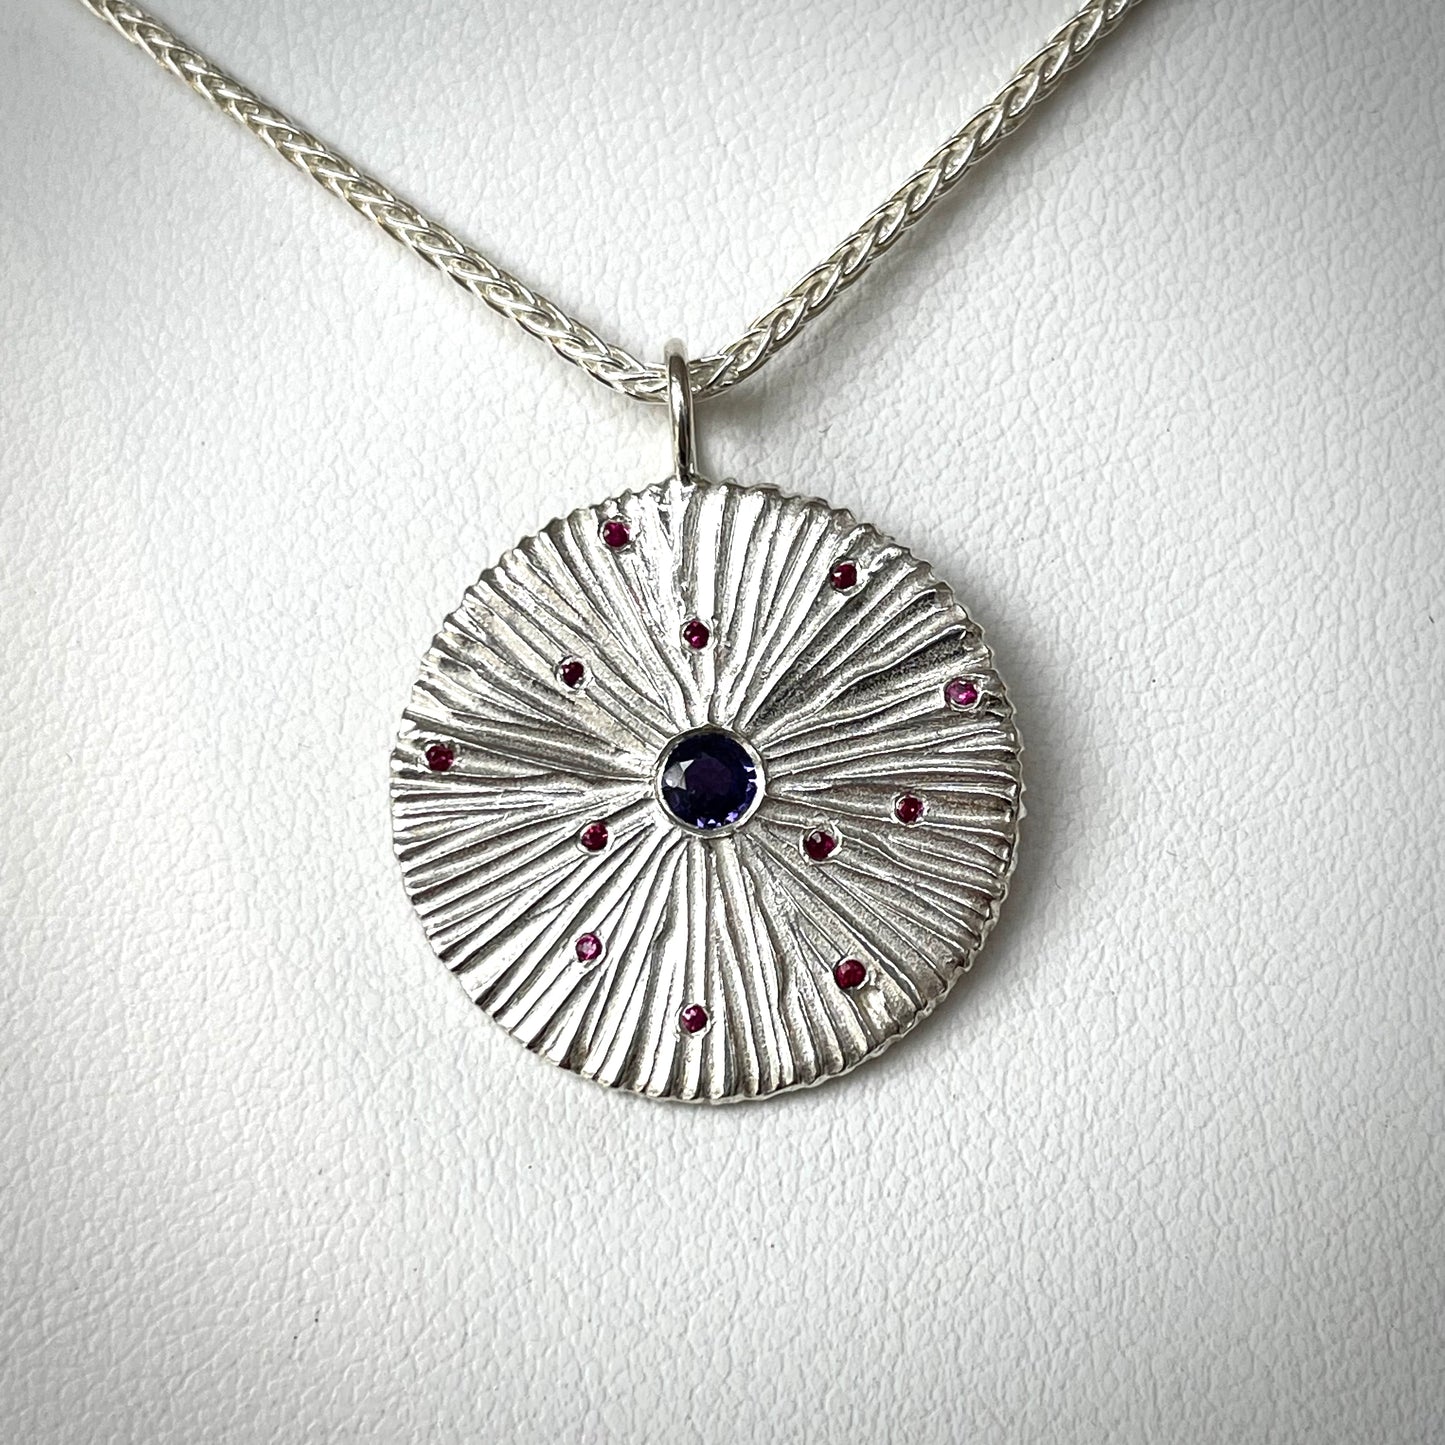 Dig Shield Pendant with Sapphires